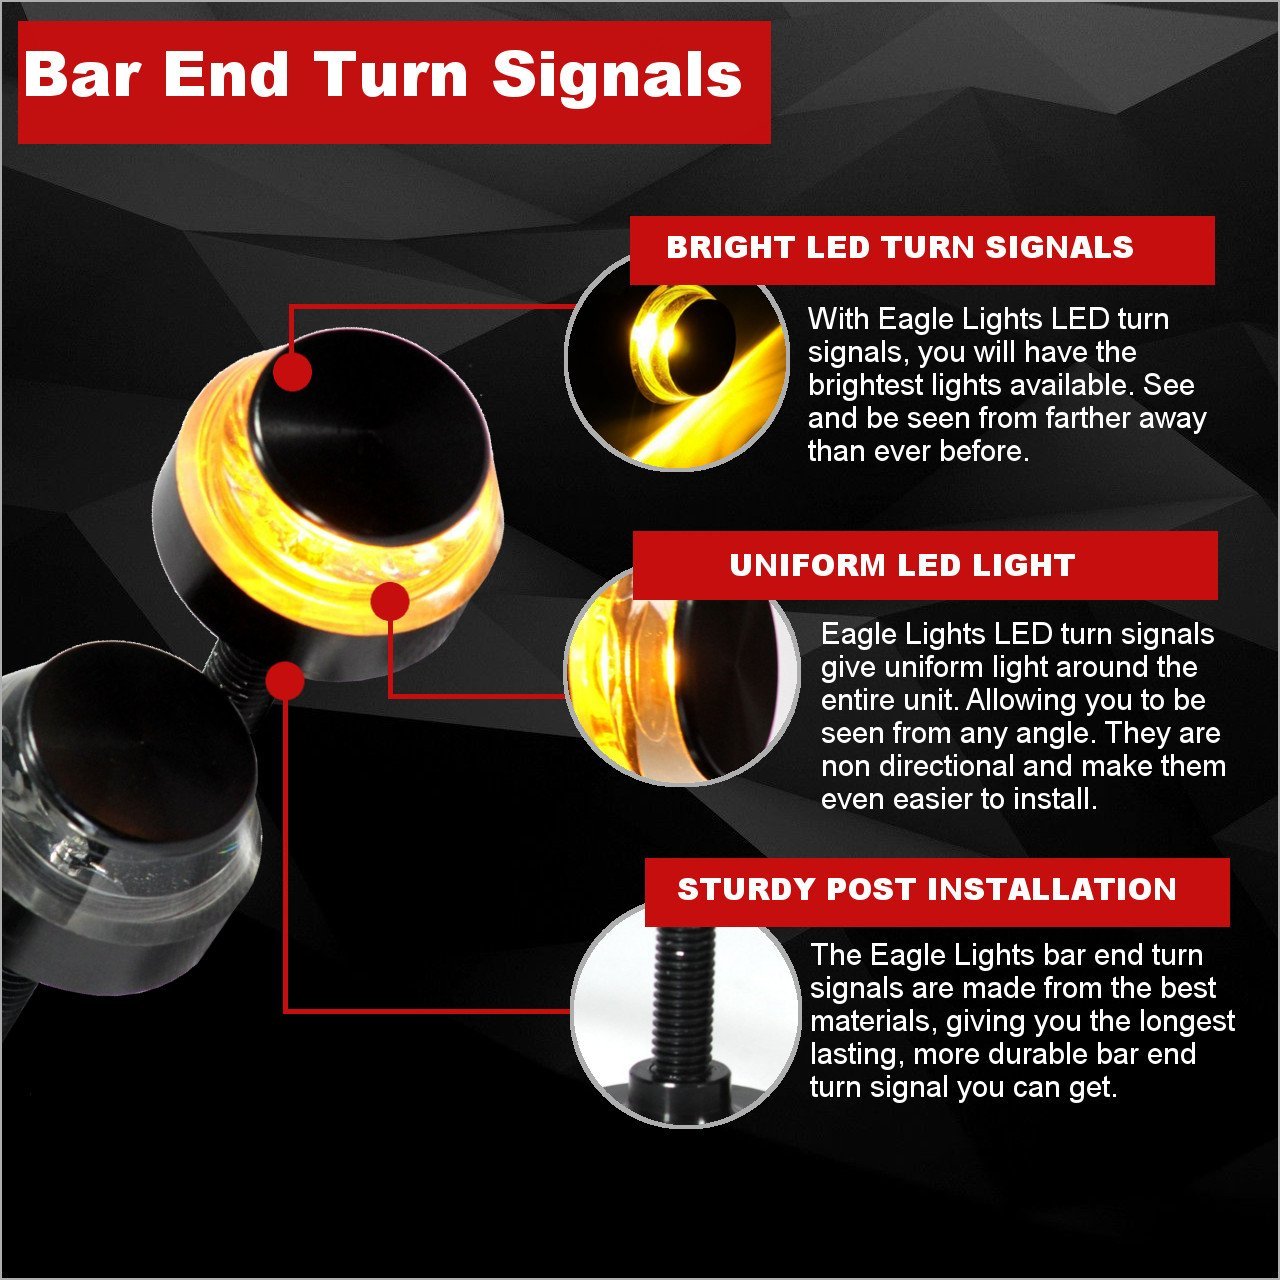 Specialty LED Turn Signals - Eagle Lights Bar End LED Turn Signals For 7/8" Handlebars - Pair